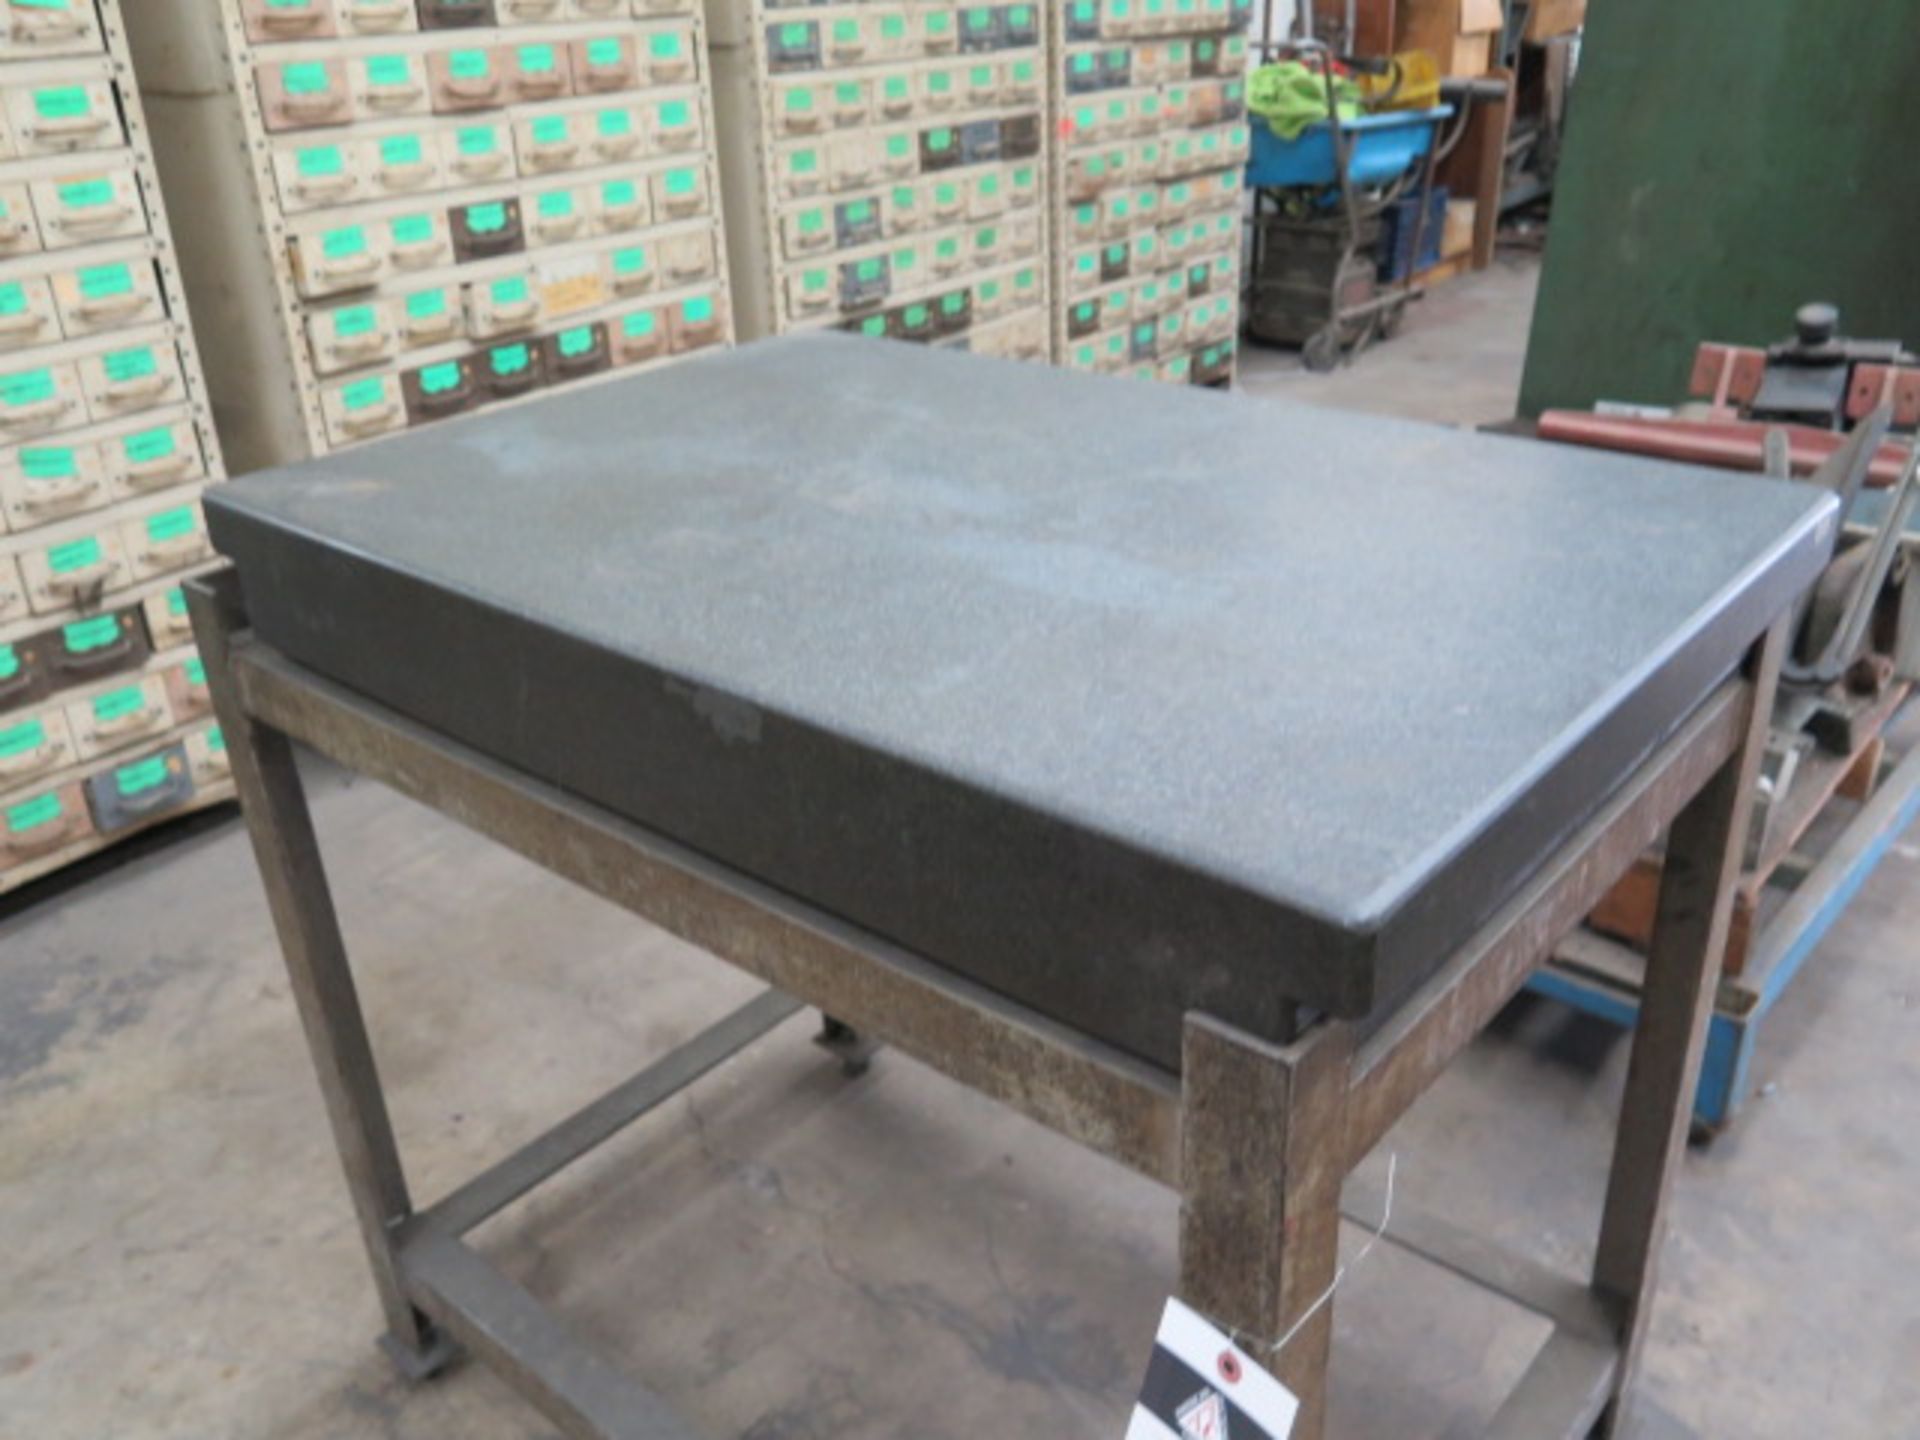 24" x 36" x 4" Granite Surface Plate w/ Stand (SOLD AS-IS - NO WARRANTY) - Image 2 of 5